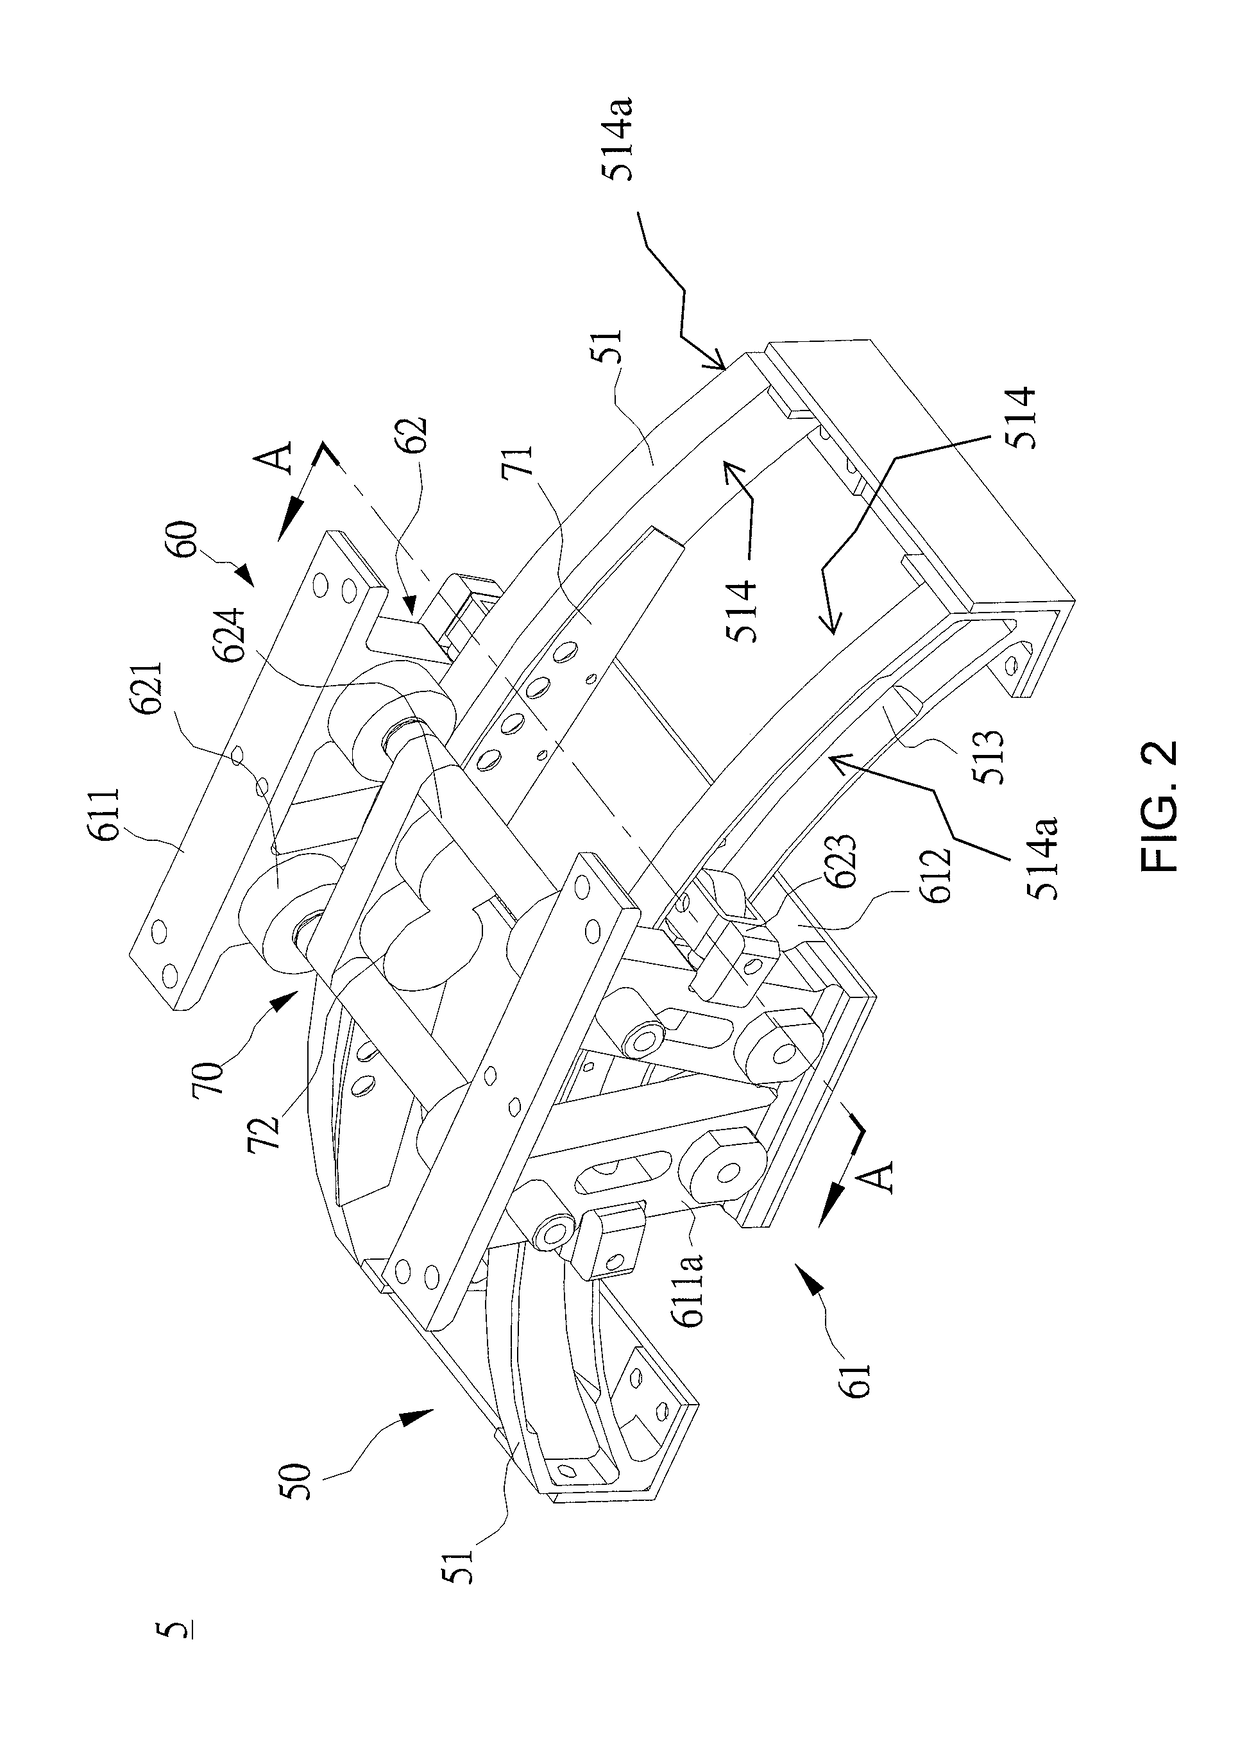 Vehicle tilting system and tricycle